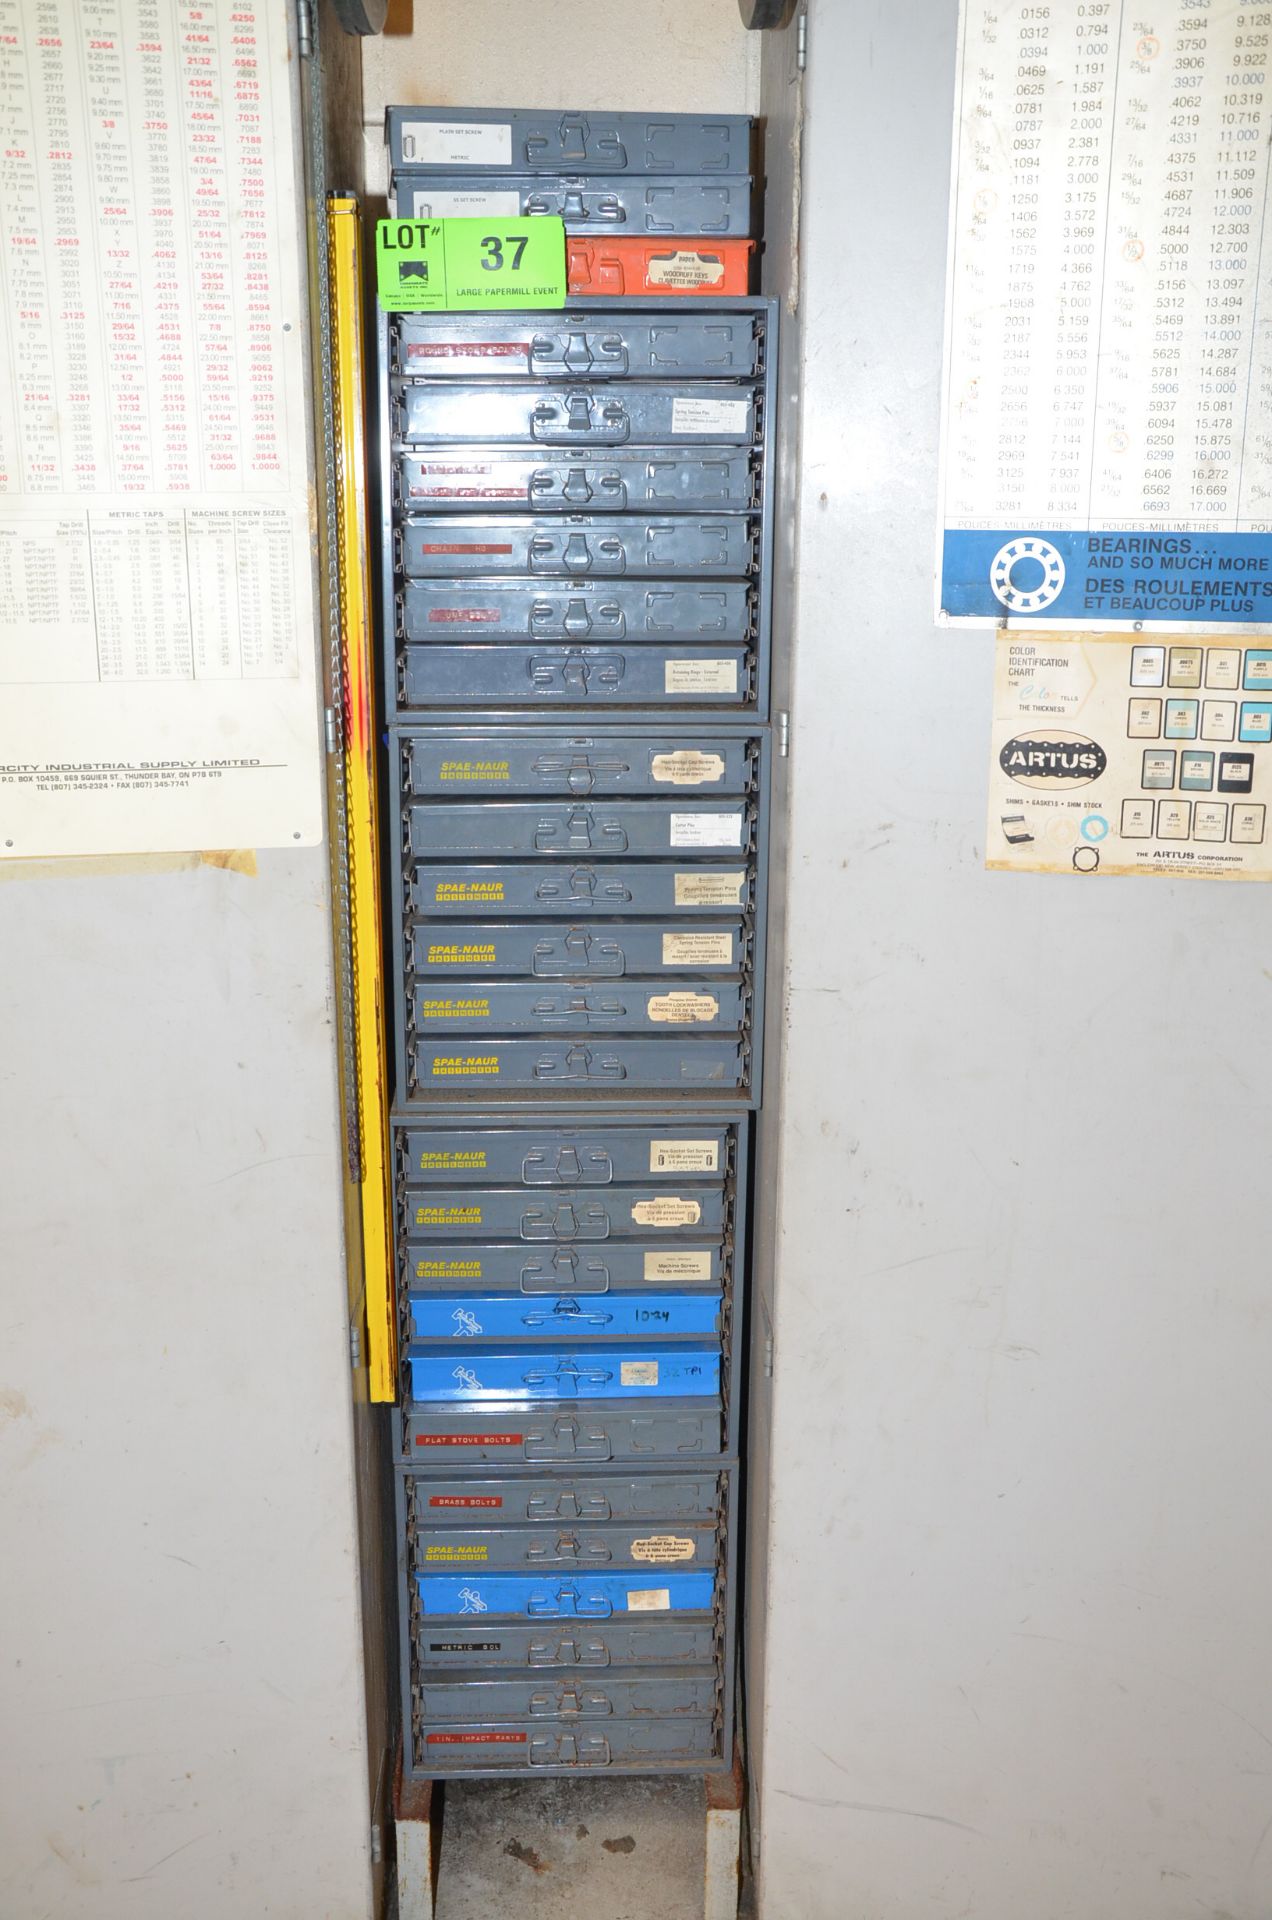 LOT/ SPAE-NAUR INDEX CABINETS WITH FASTENING HARDWARE [RIGGING FEES FOR LOT #37 - $85 USD PLUS